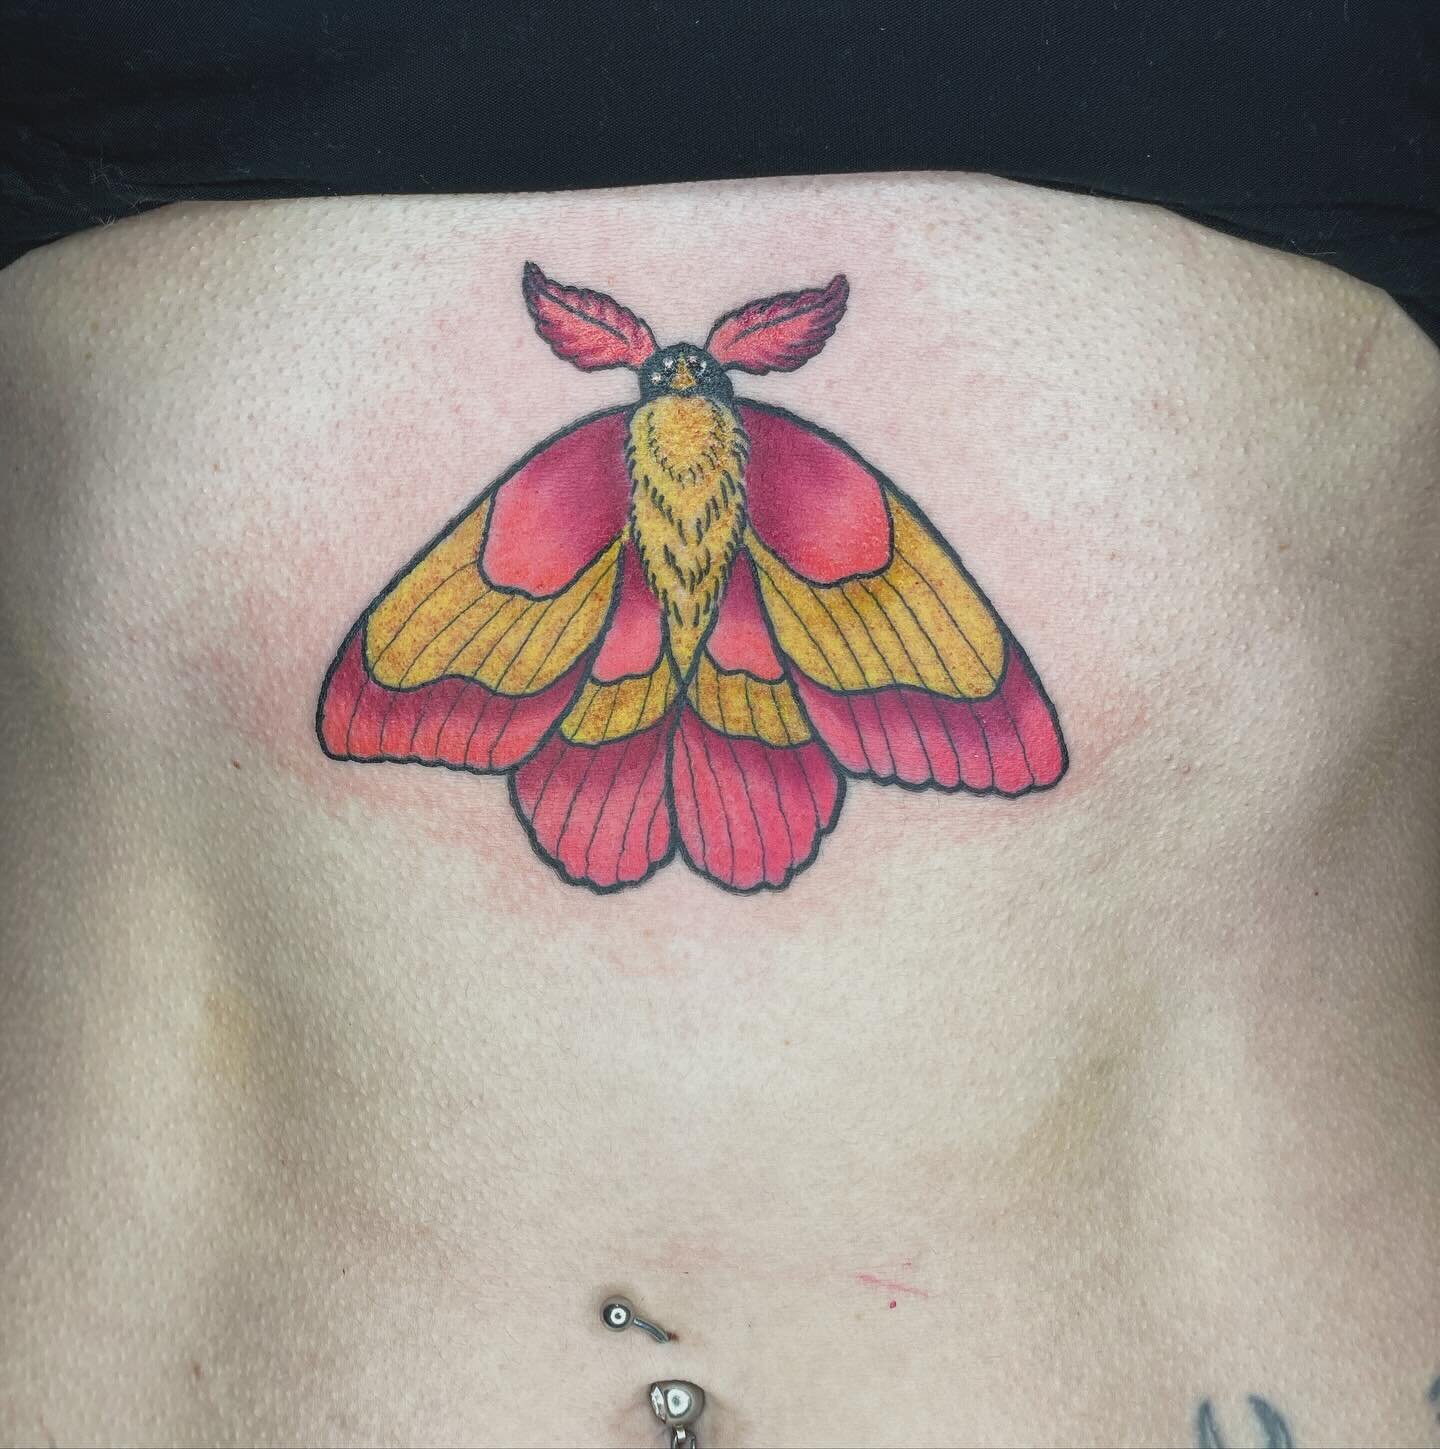 Fun rosy maple moth from today 🦋 
.
.
.
.
.
.
First you dip, then you rip. Thanks for looking. Link in bio to book 🤙🏾